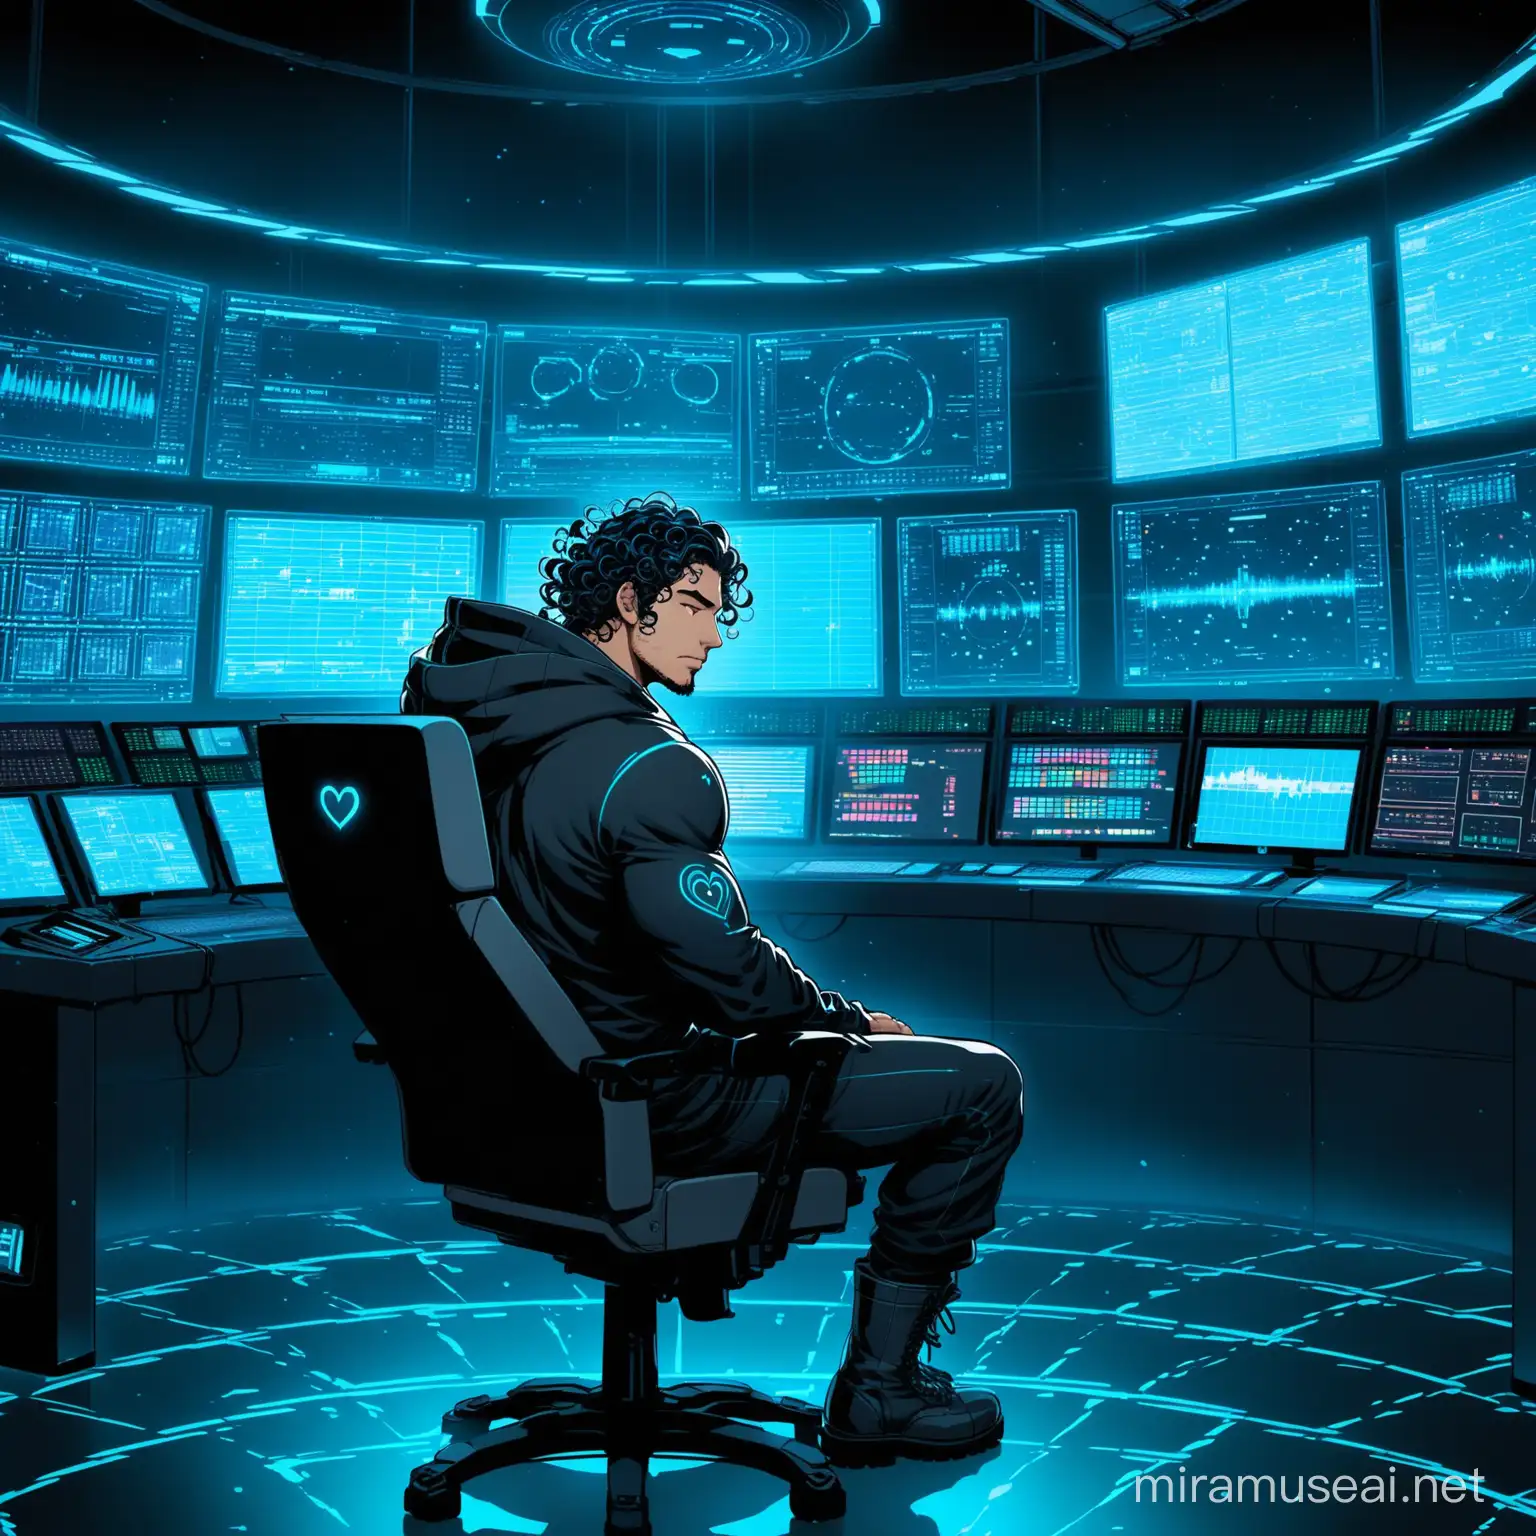 A high tech control room, dimly lit with blue light. An Latino man with thick biceps to match sleeps in his chair out cold in a well needed slumber in front of Several holographic screens float above him. He wears a dark hoody and combat boots his hair is short wet curly ringlets he monitors the heart rate on one of the screens